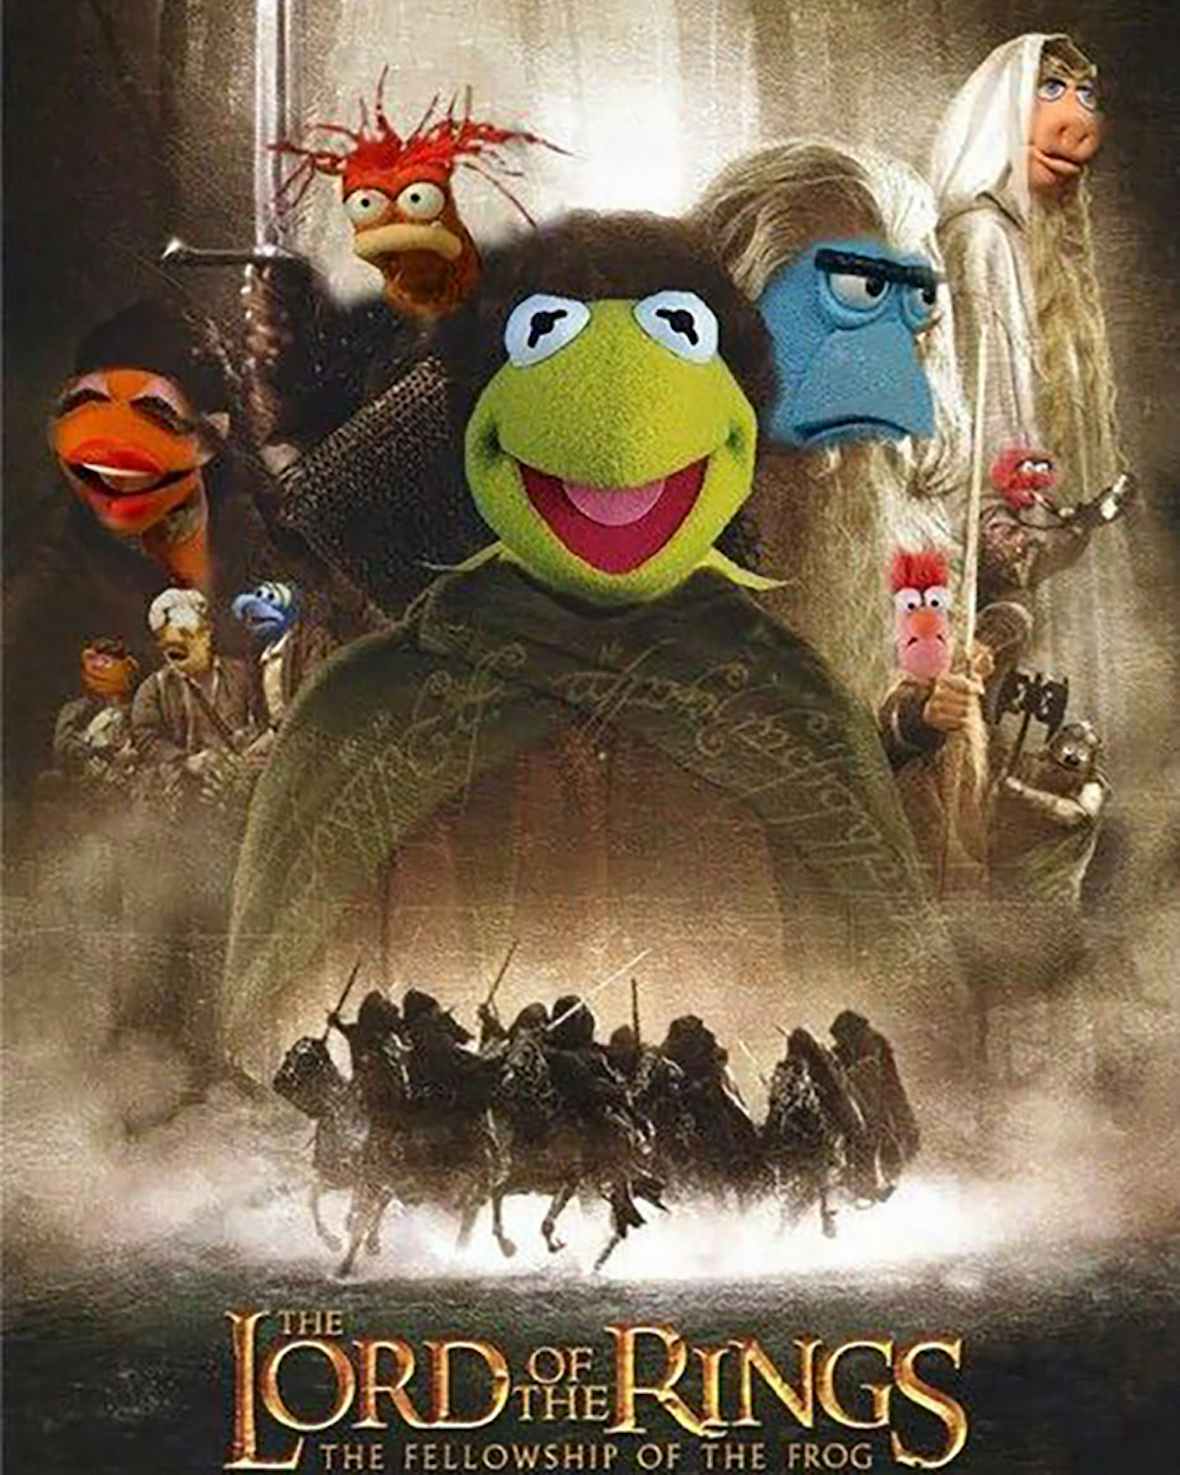 The case for The Muppet Lord of the Rings - The Face